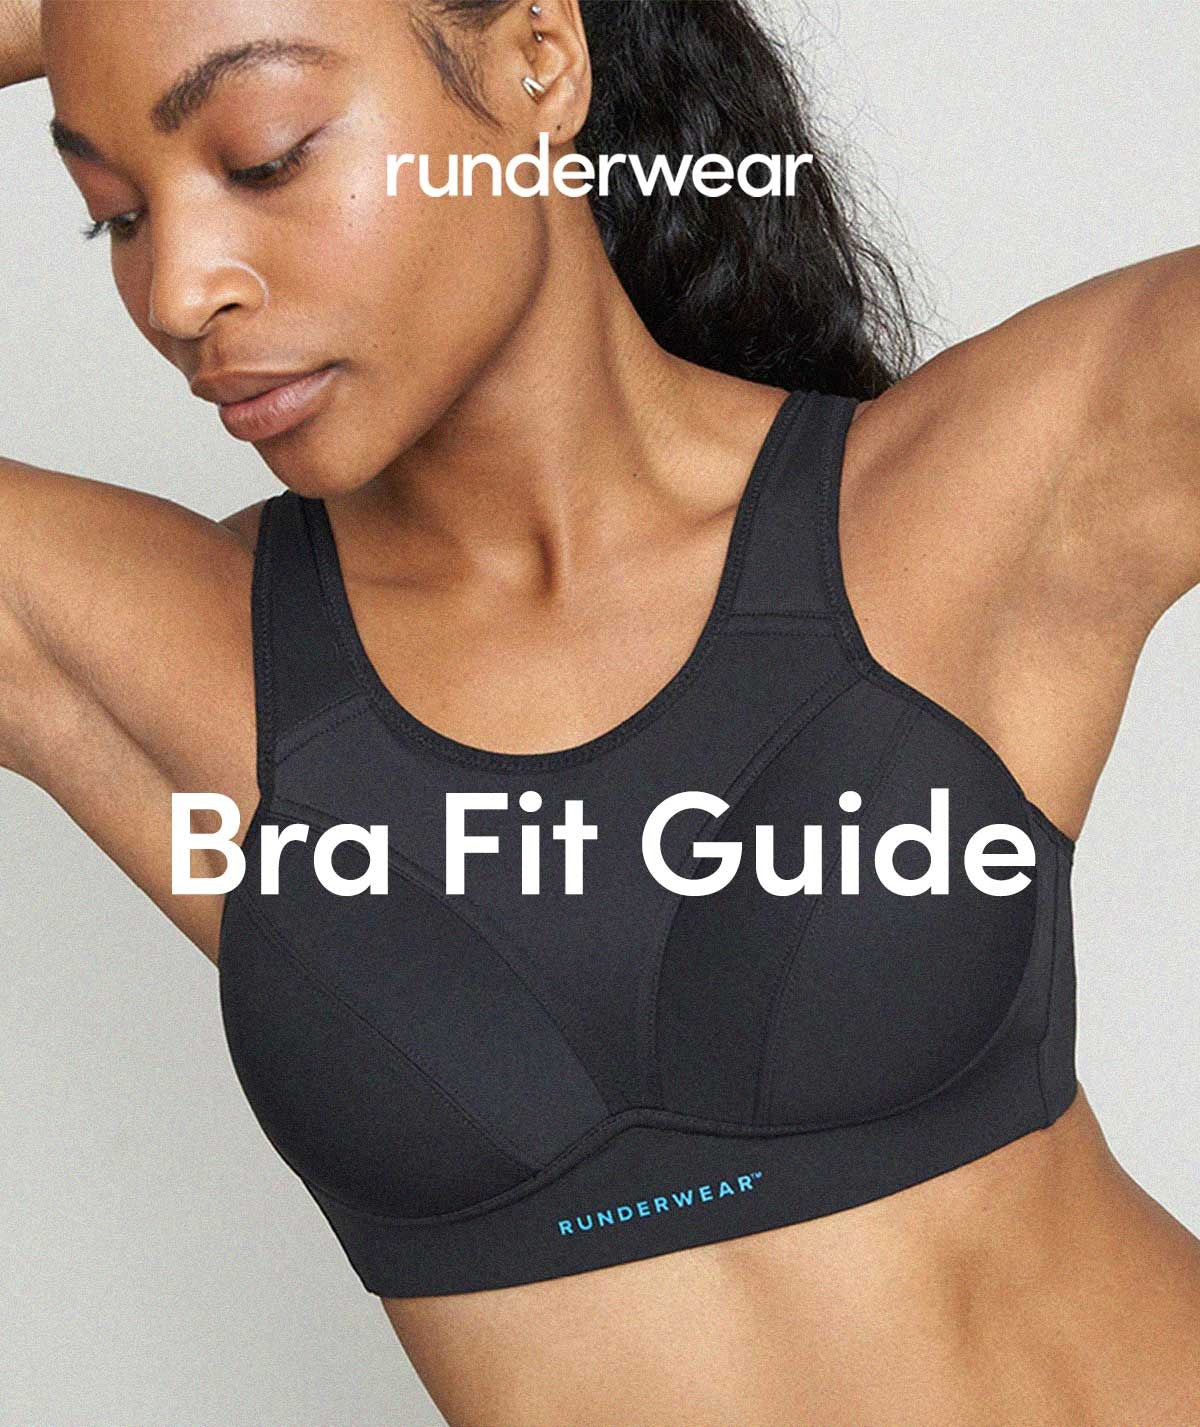 Bra Fit Guide for Runners and Exercise